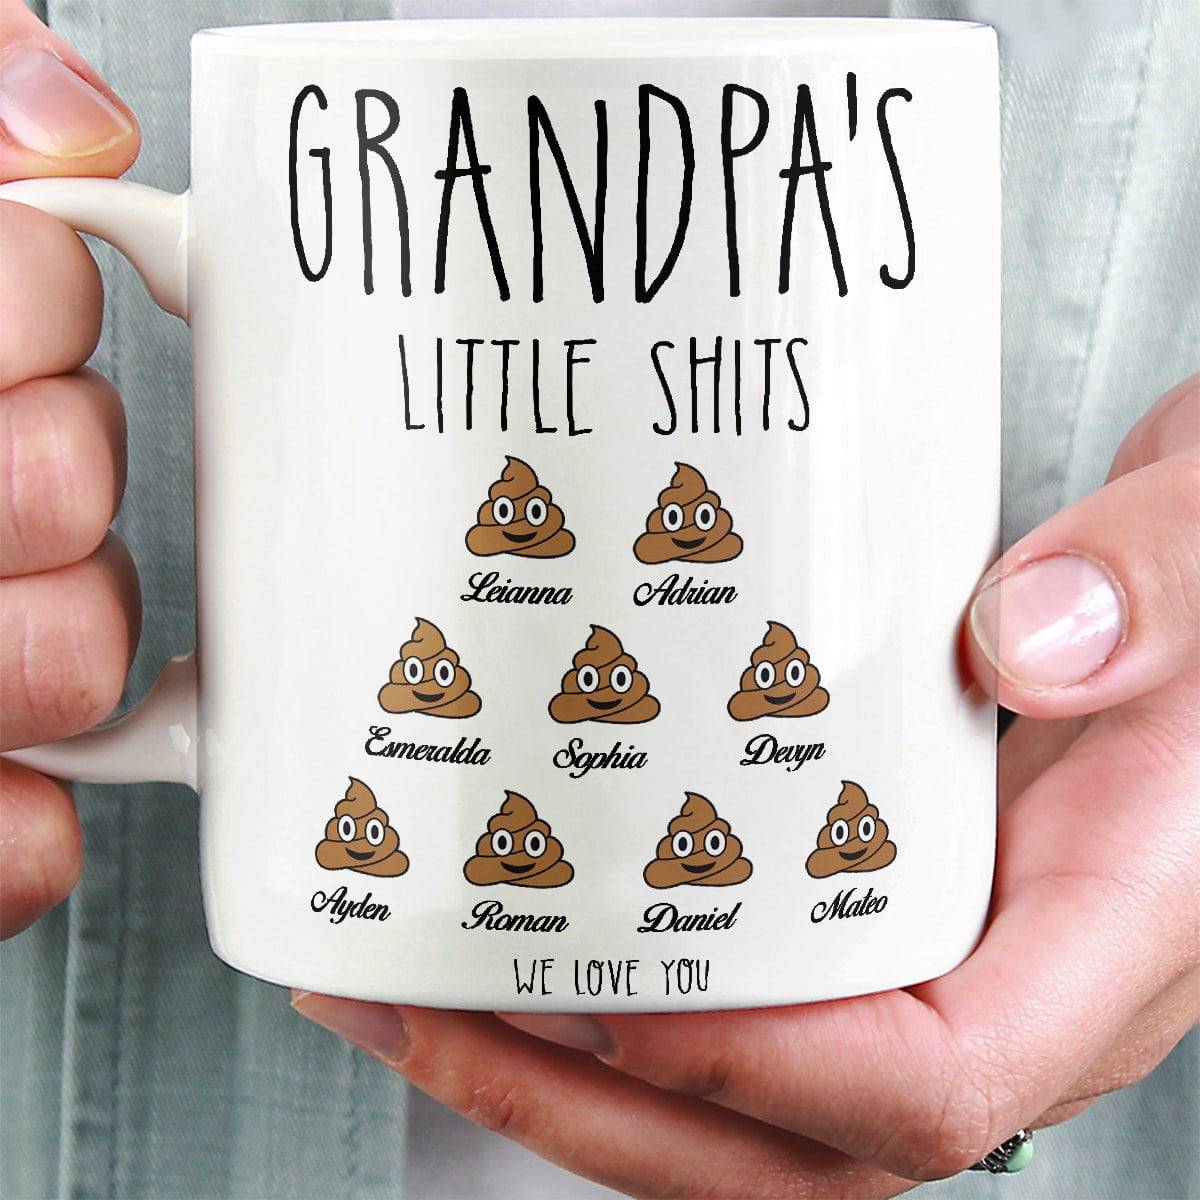 Personalized Mommy's Little Shits Coffee Mug - Mother's Day Gift For Grandma / Mom